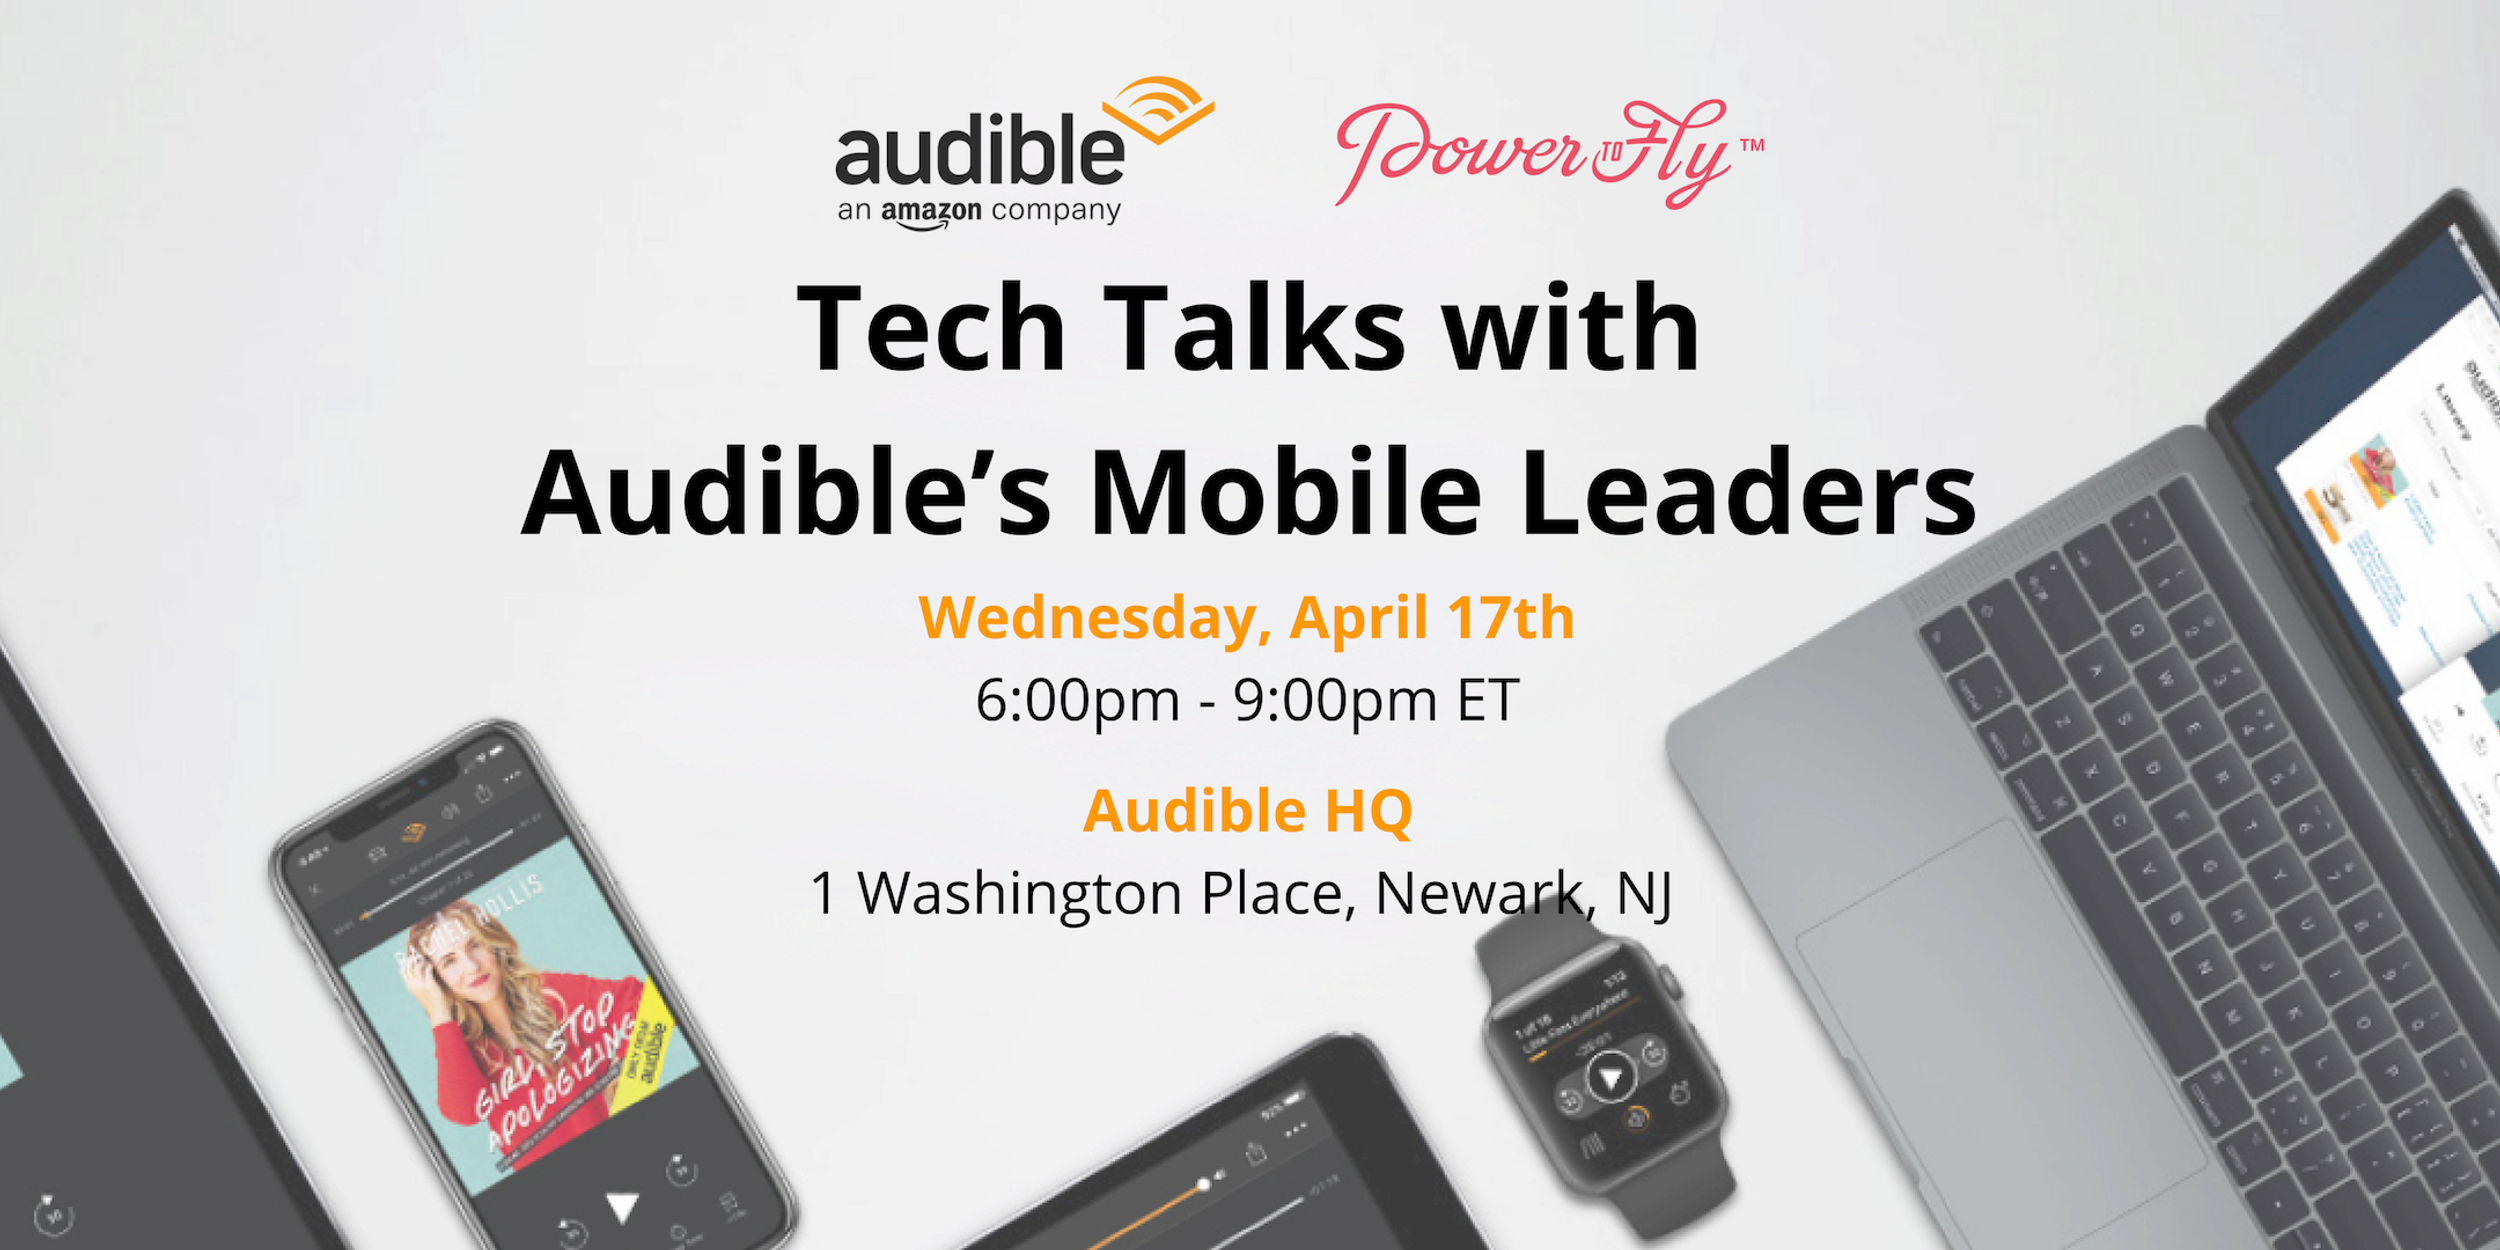 Tech Talks with Audible’s Mobile Leaders